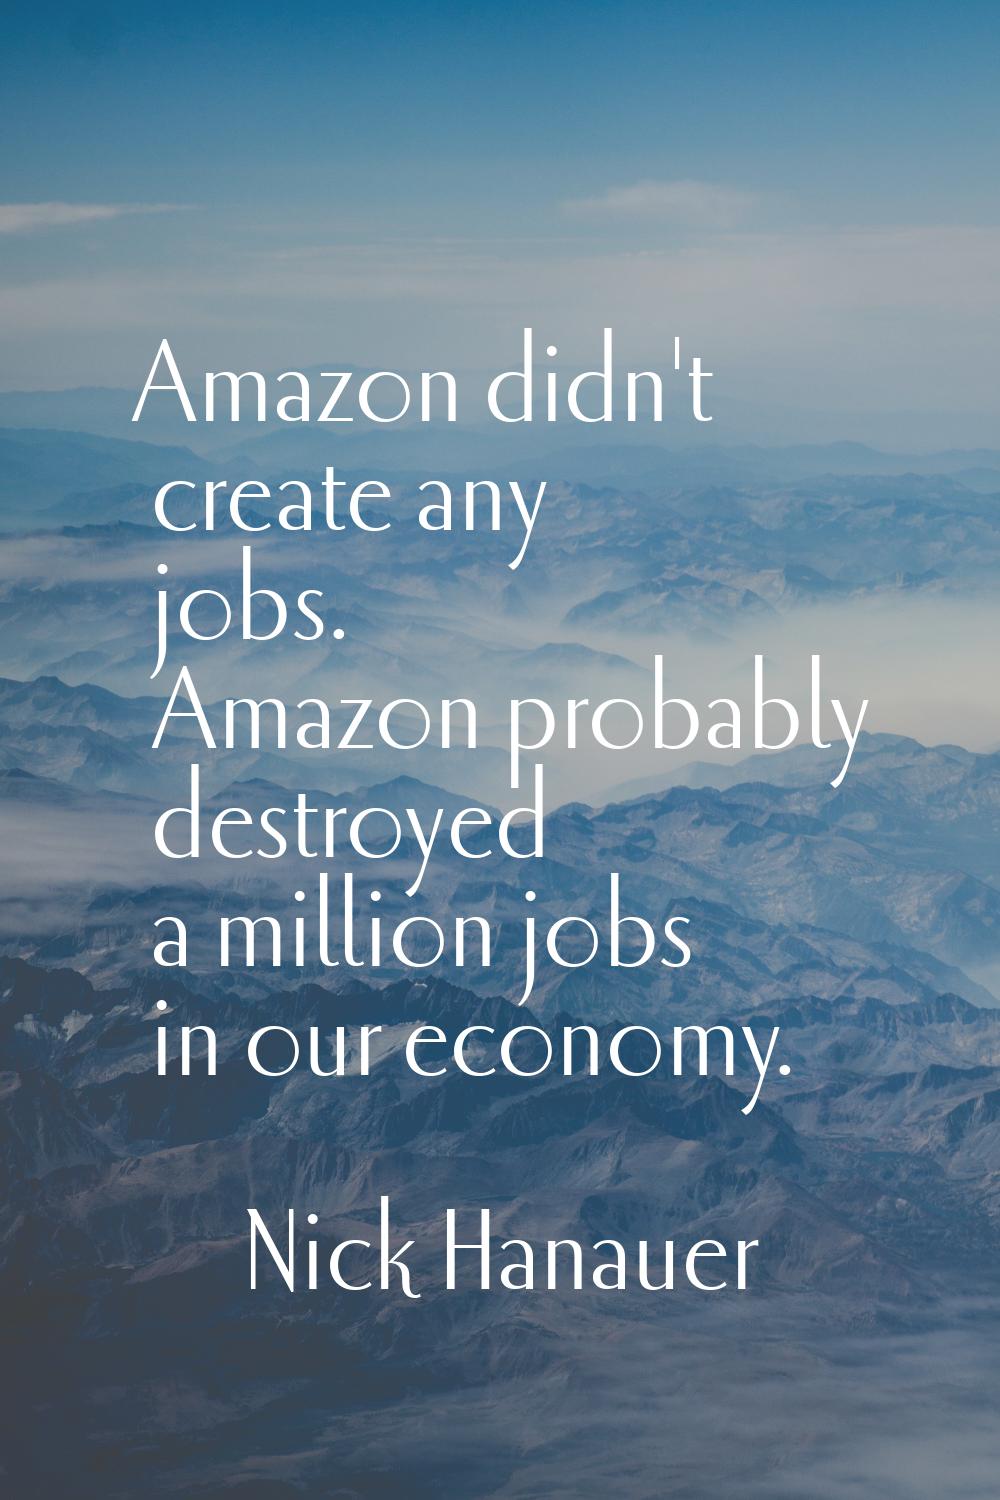 Amazon didn't create any jobs. Amazon probably destroyed a million jobs in our economy.